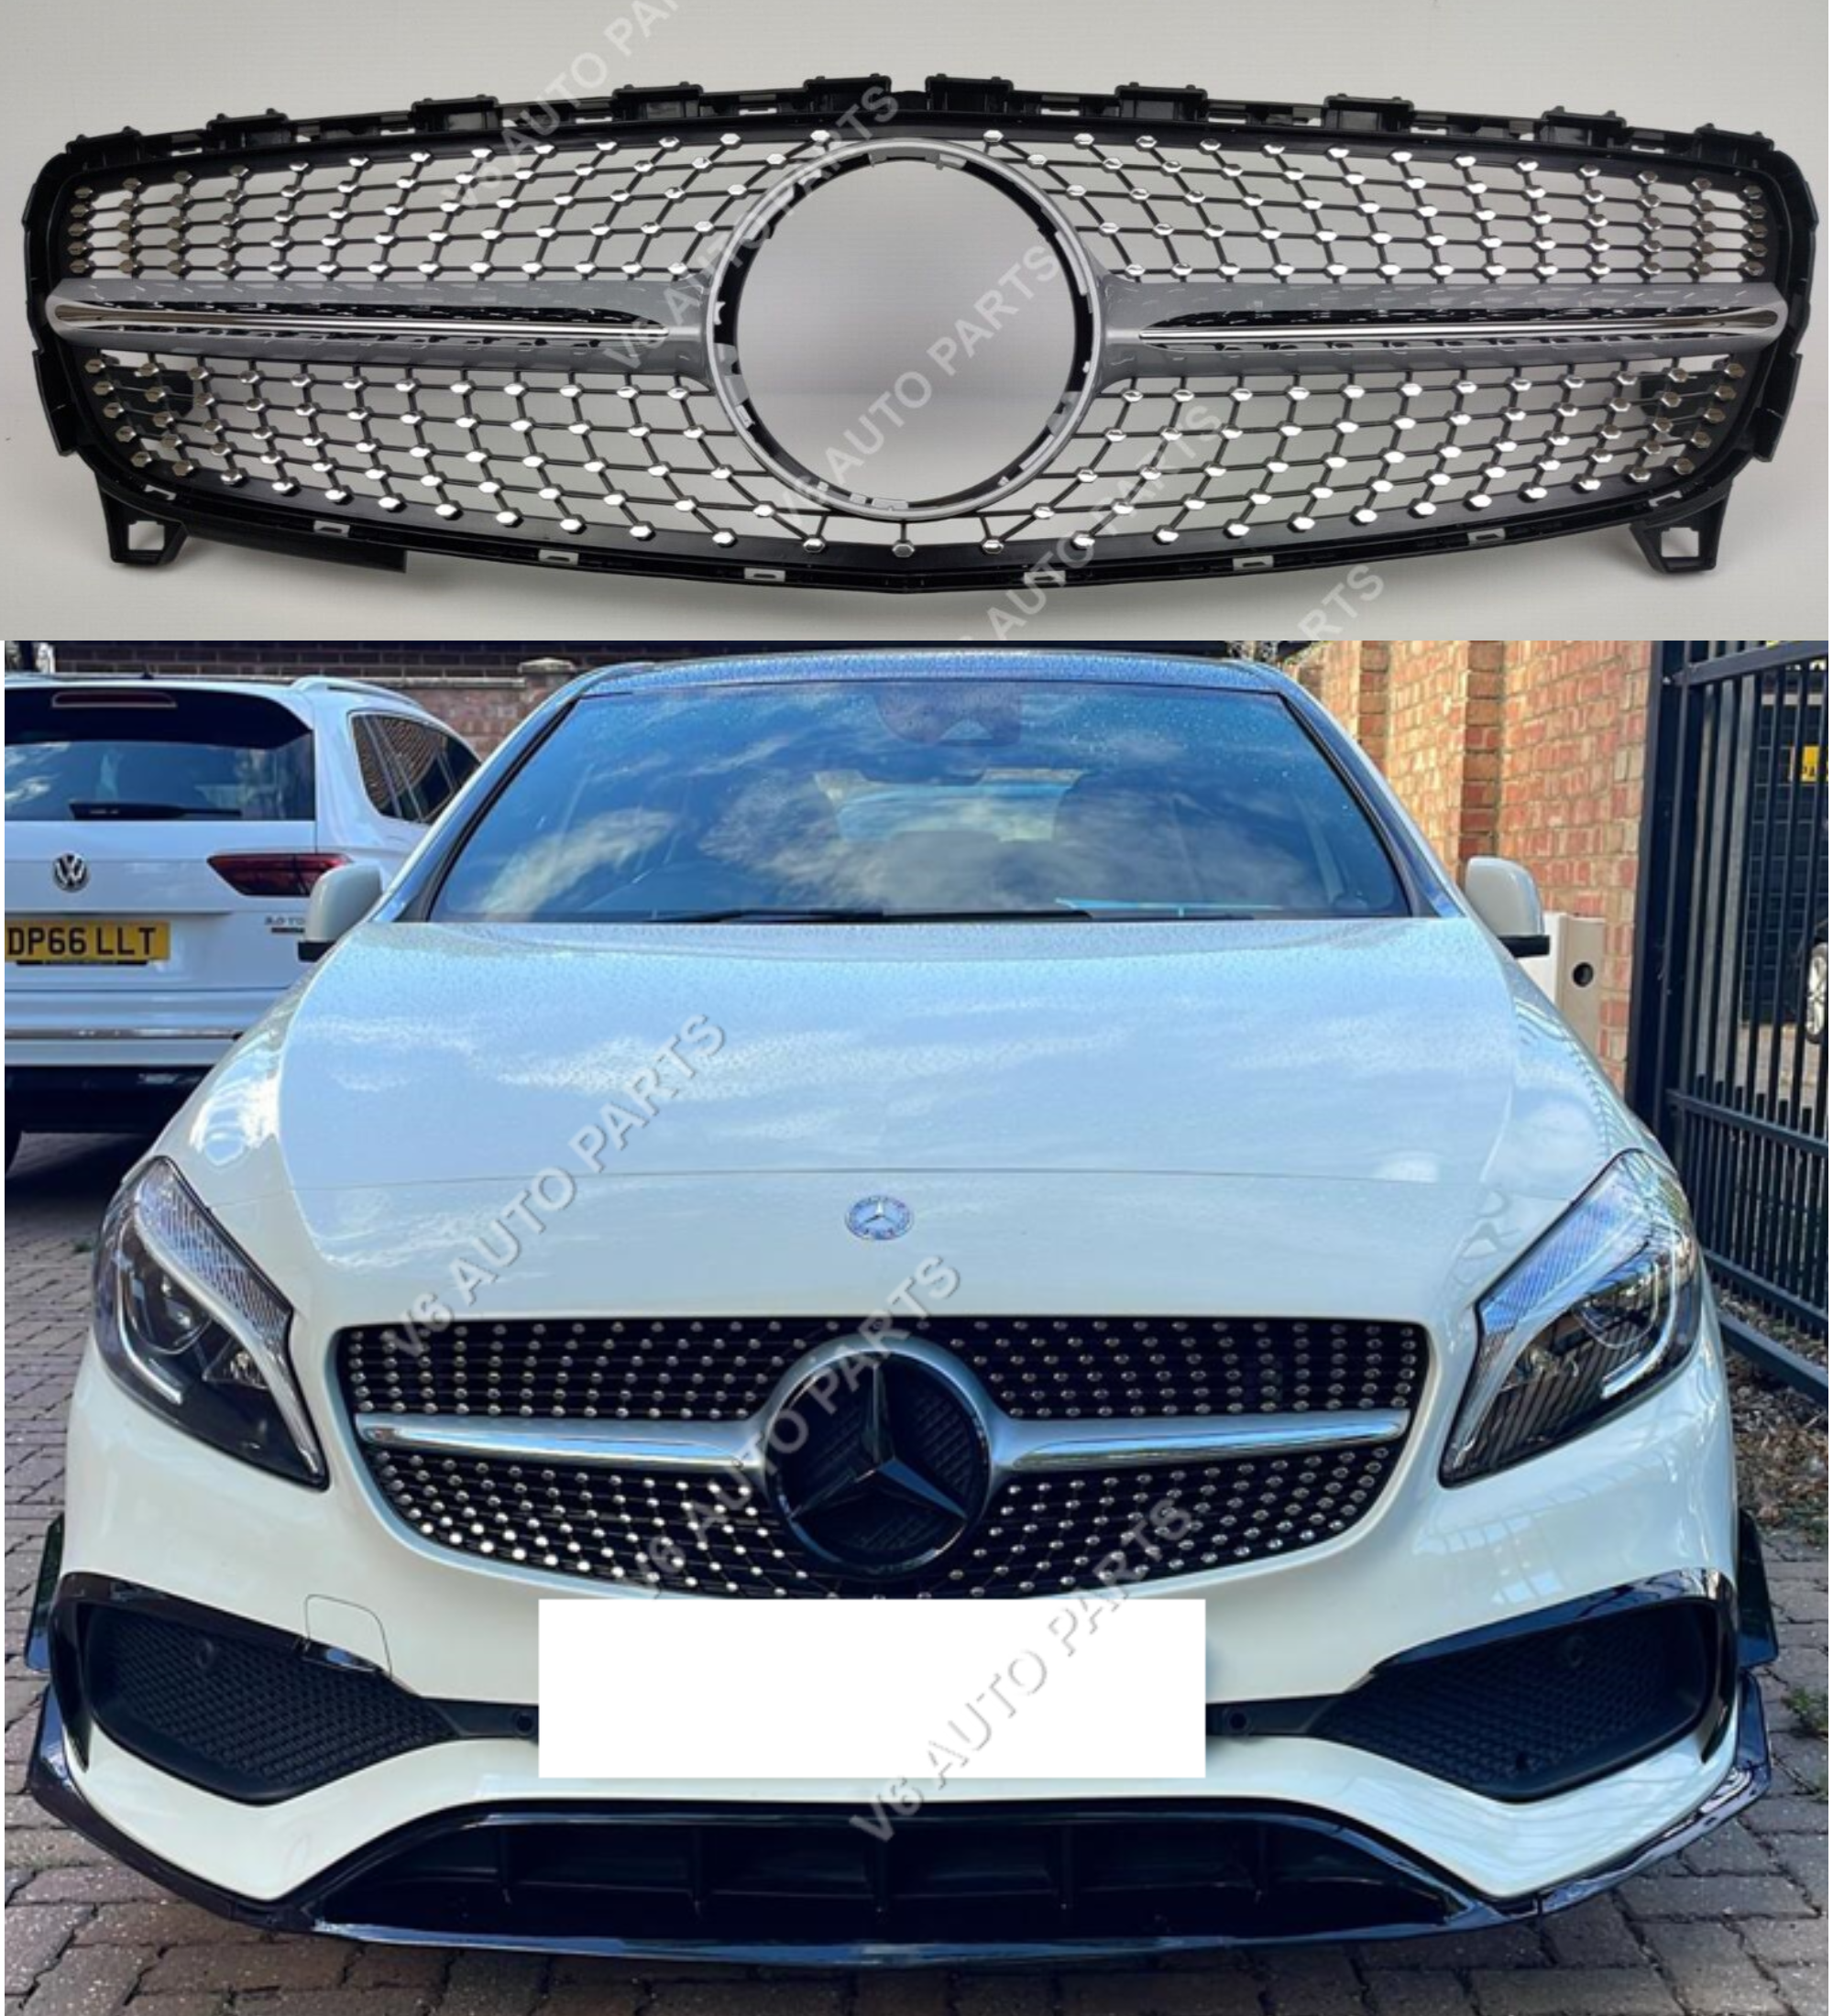 Front Radiator Grille 2015 to 2018 Mercedes Benz A-CLASS W176 A200 A220 A160 A45 AMG Diamond Grille